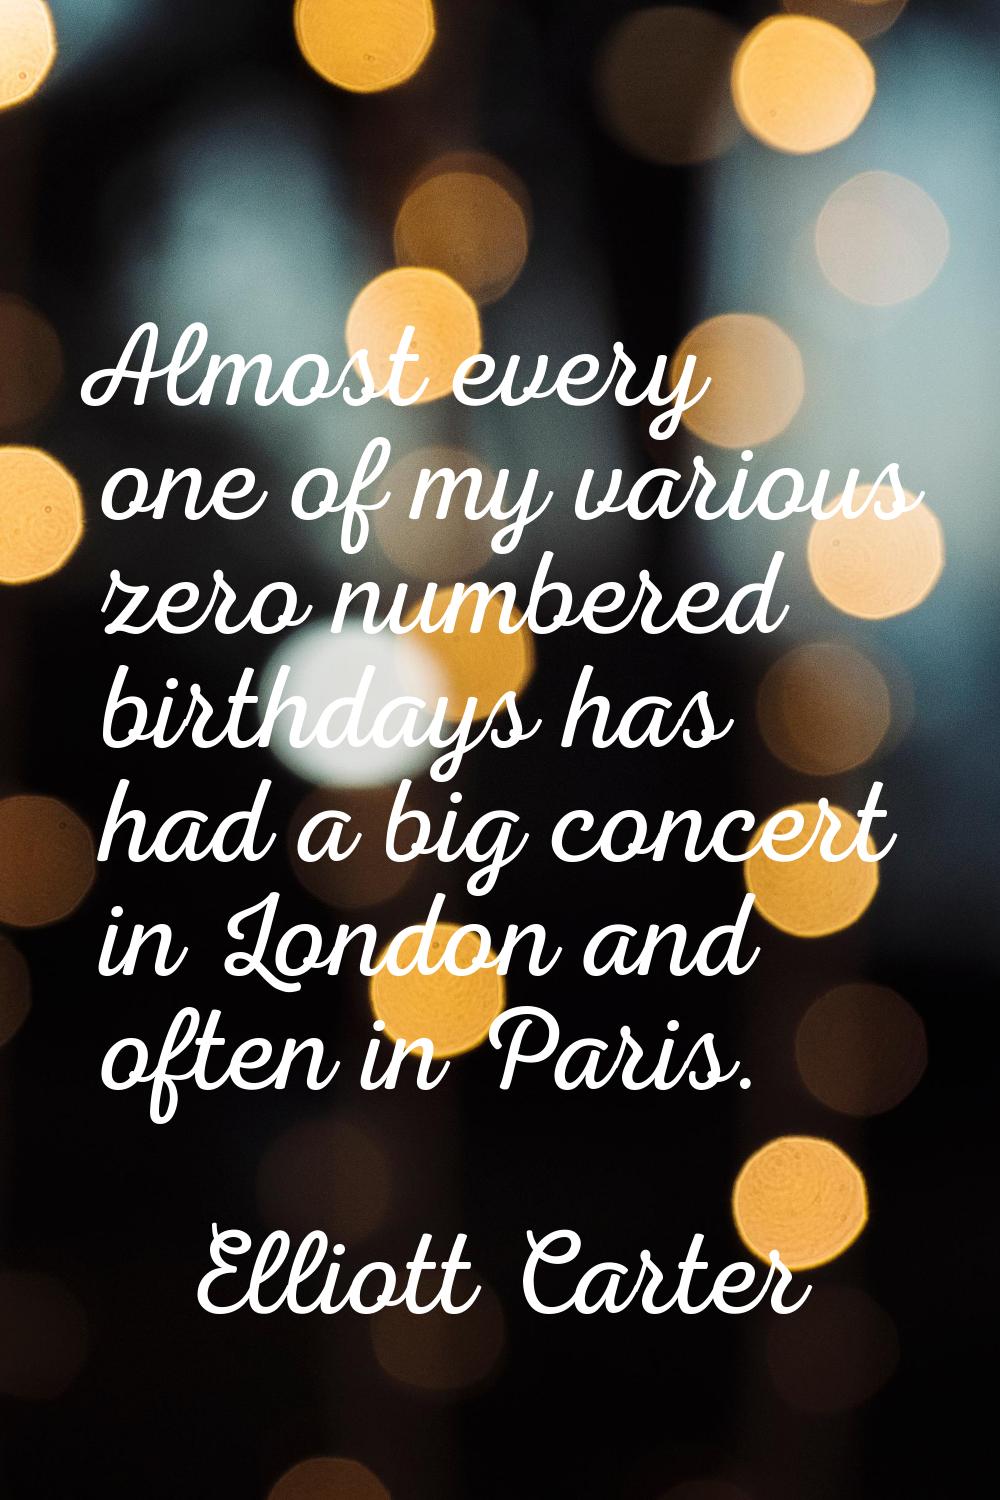 Almost every one of my various zero numbered birthdays has had a big concert in London and often in